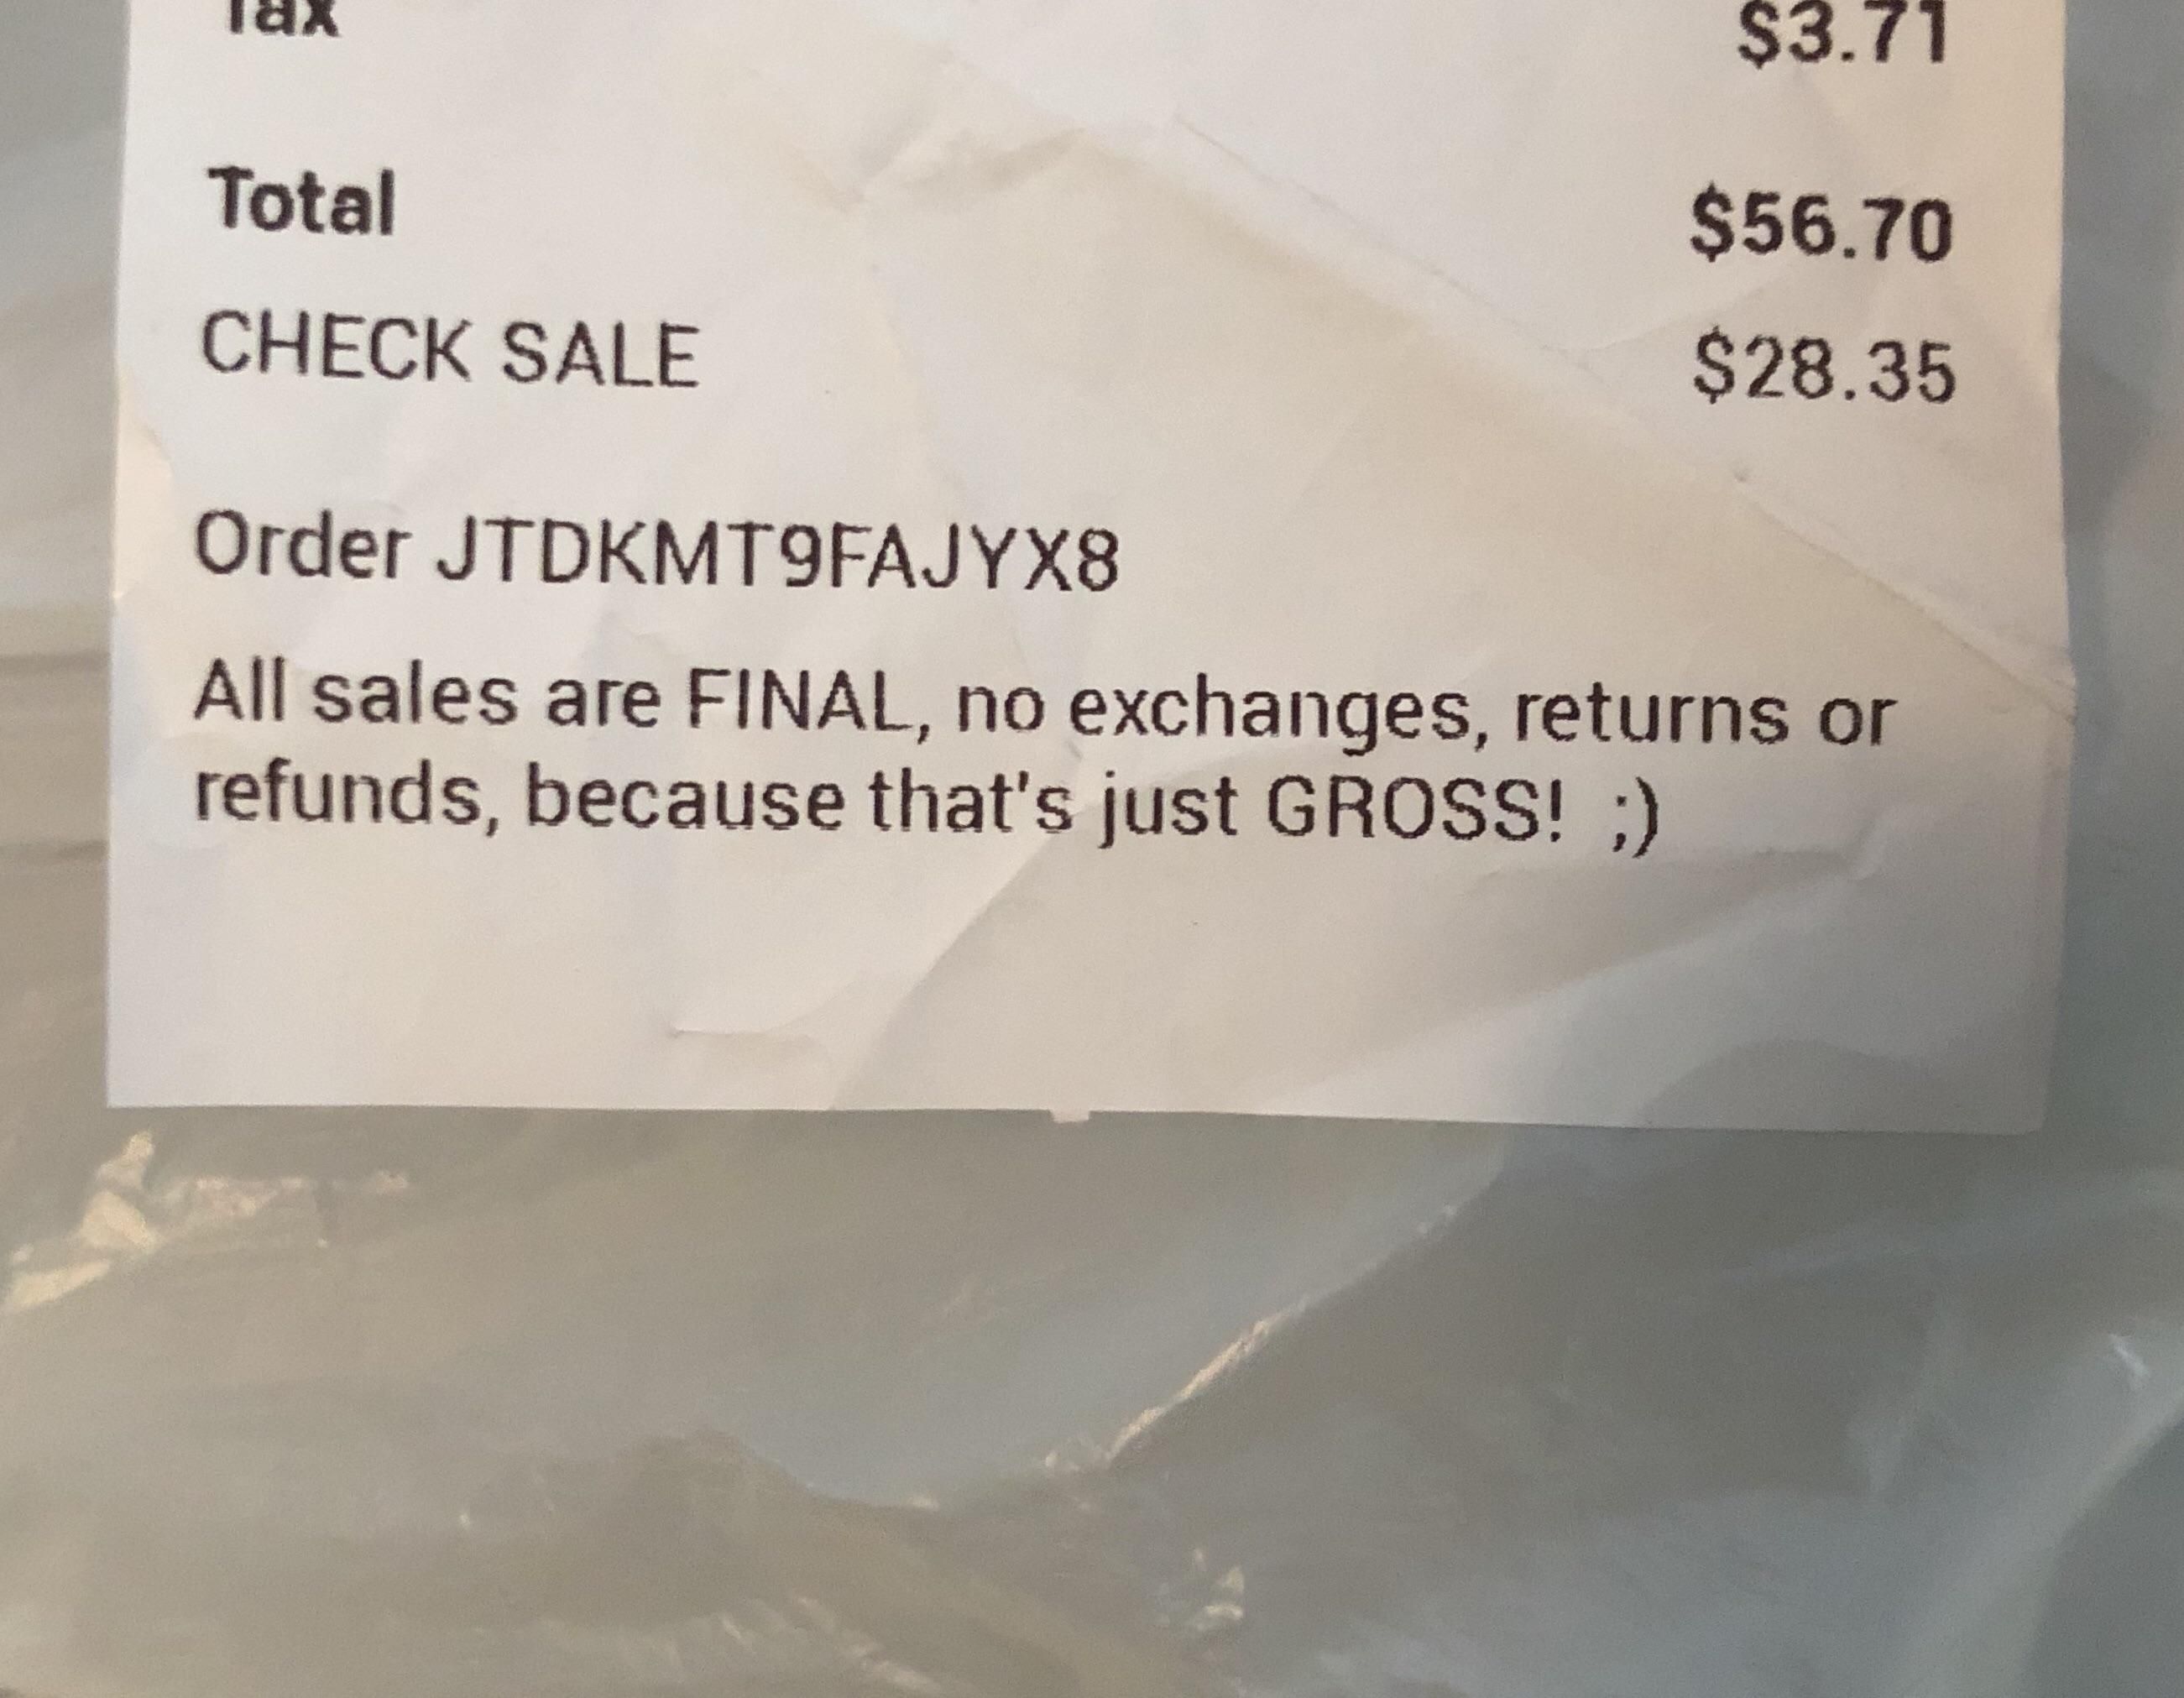 The receipt for a sex shop, thank god i guess??